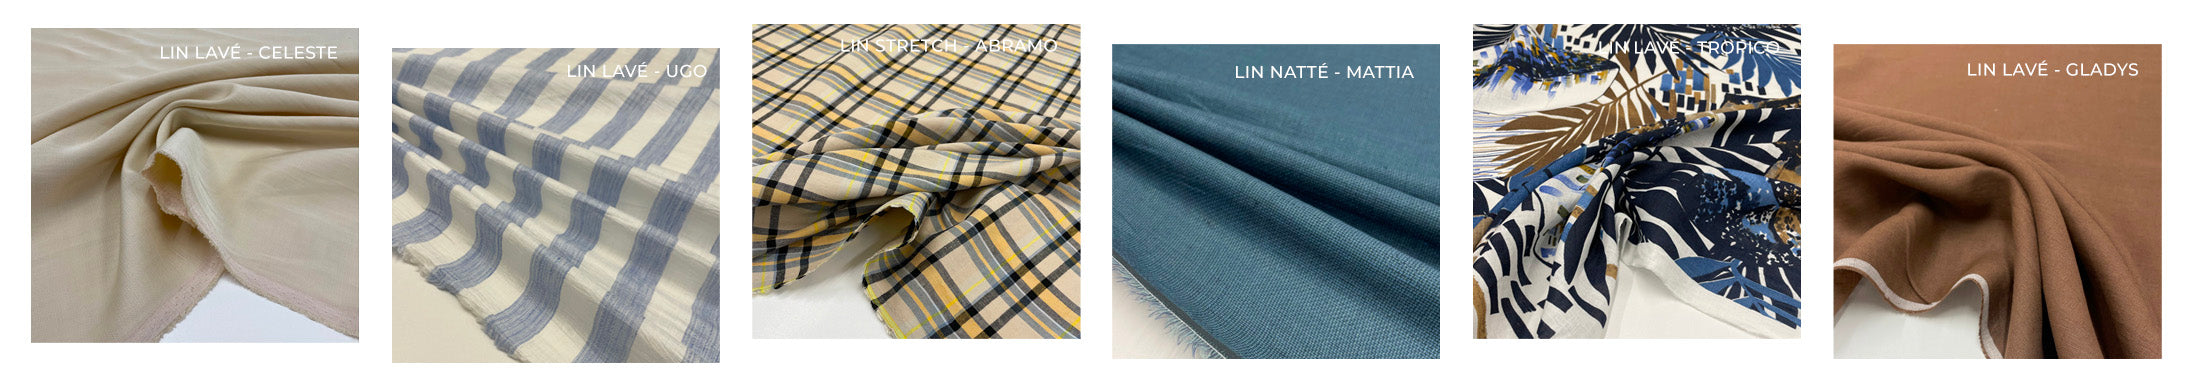 tissu made in italy 100% lin